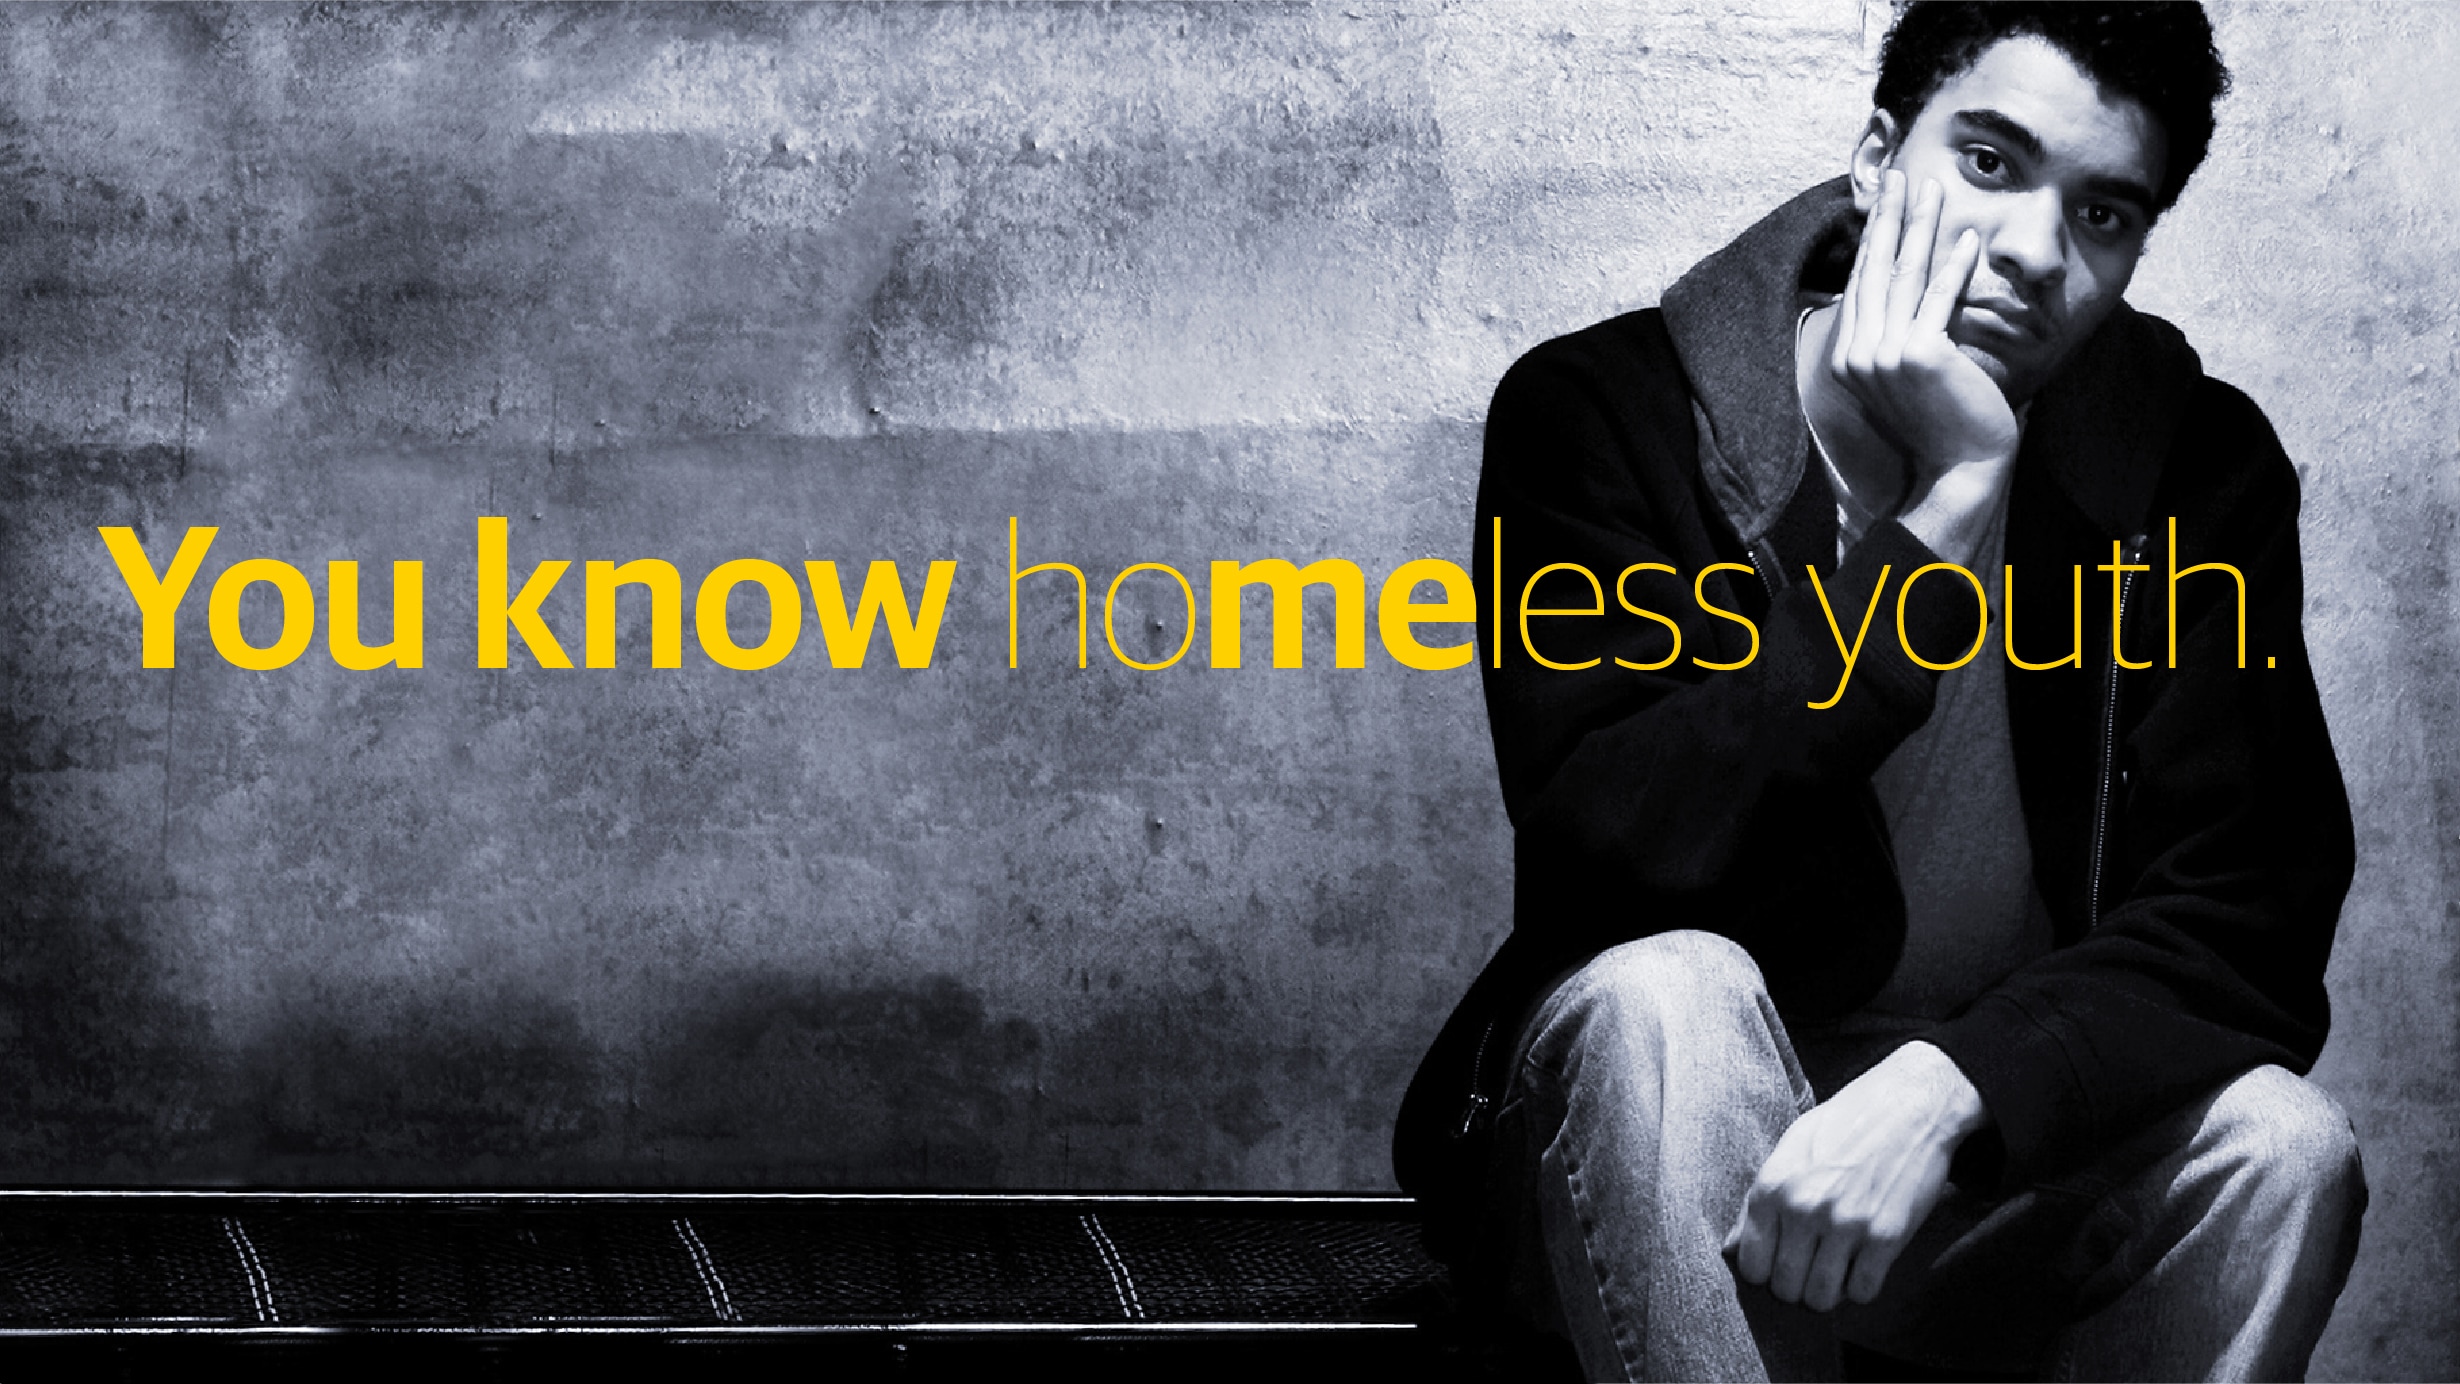 Liberty Mutual Insurance Launches Comprehensive Education Campaign on Youth Homelessness Crisis in Boston